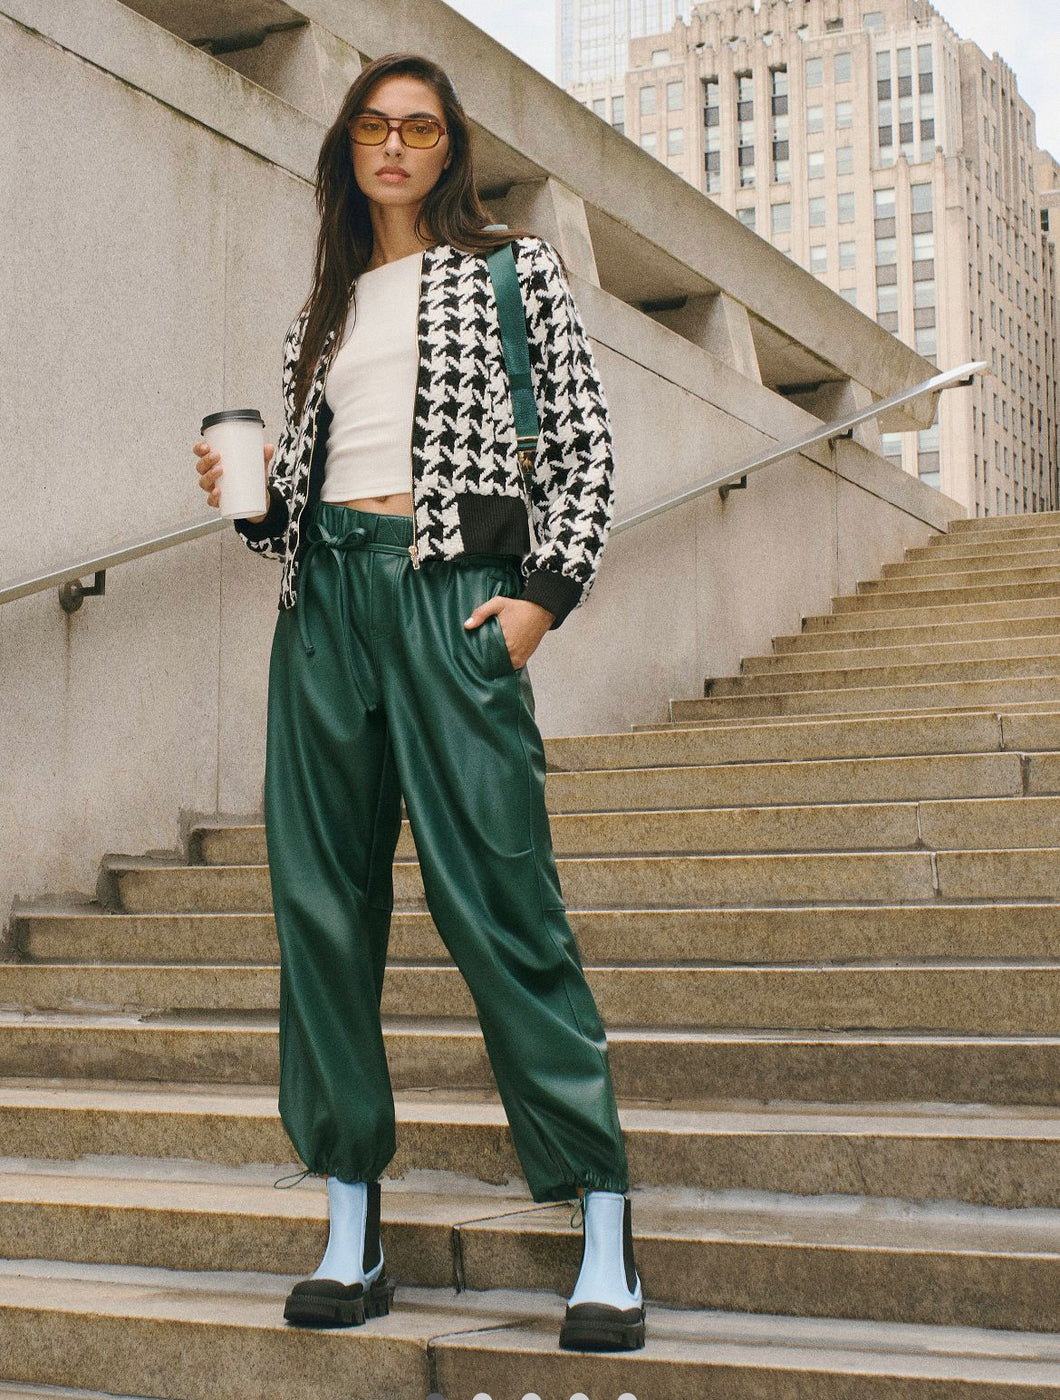 Vegan Leather Belted Pants